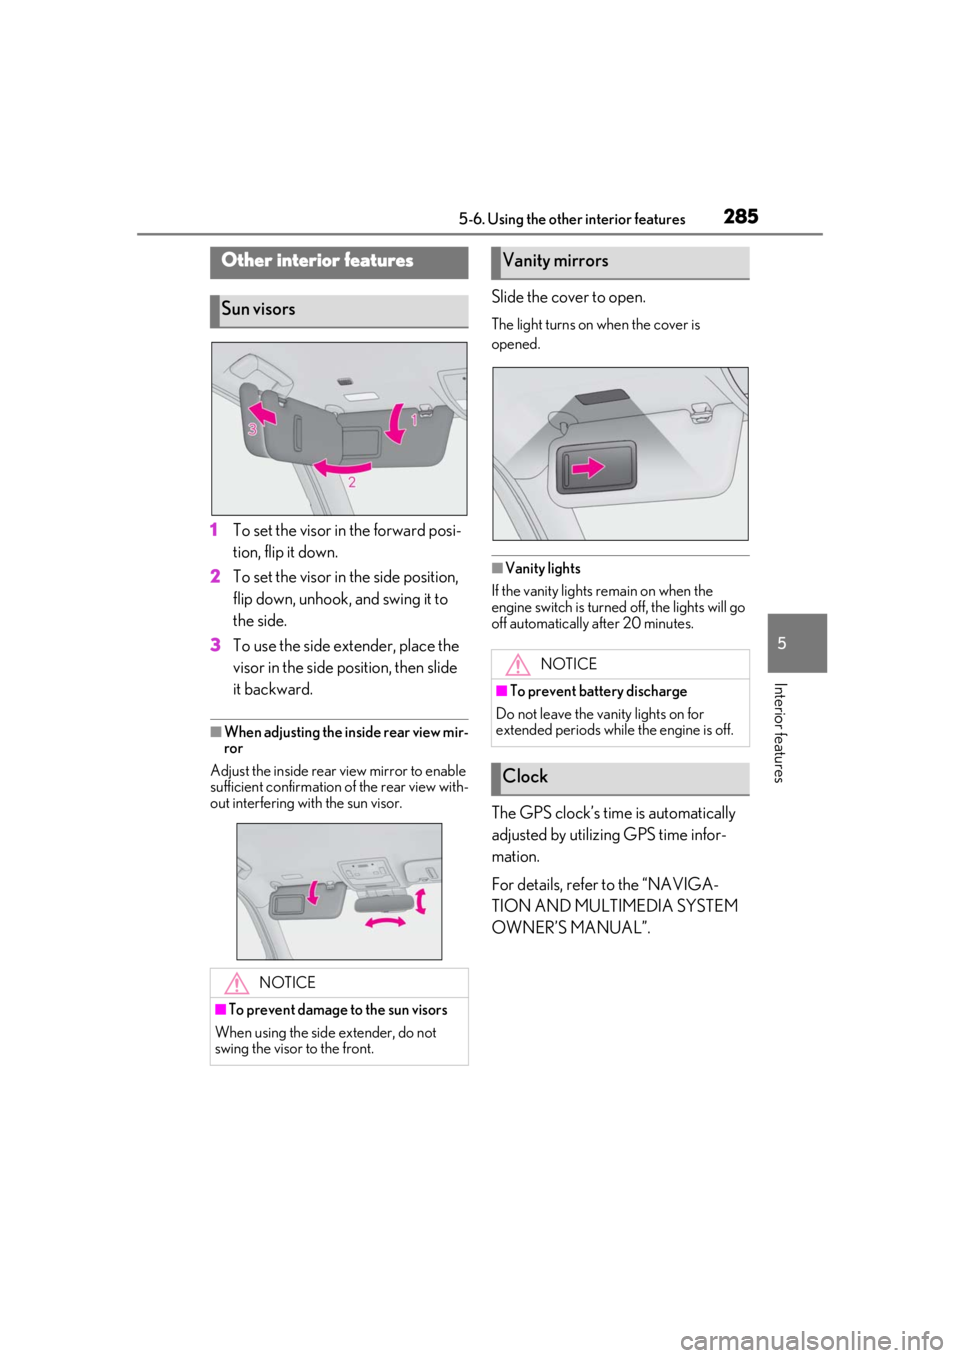 LEXUS UX200 2019  Owners Manual 2855-6. Using the other interior features
5
Interior features
5-6.Using the other interior features
1To set the visor in the forward posi-
tion, flip it down.
2
To set the visor in the side position, 